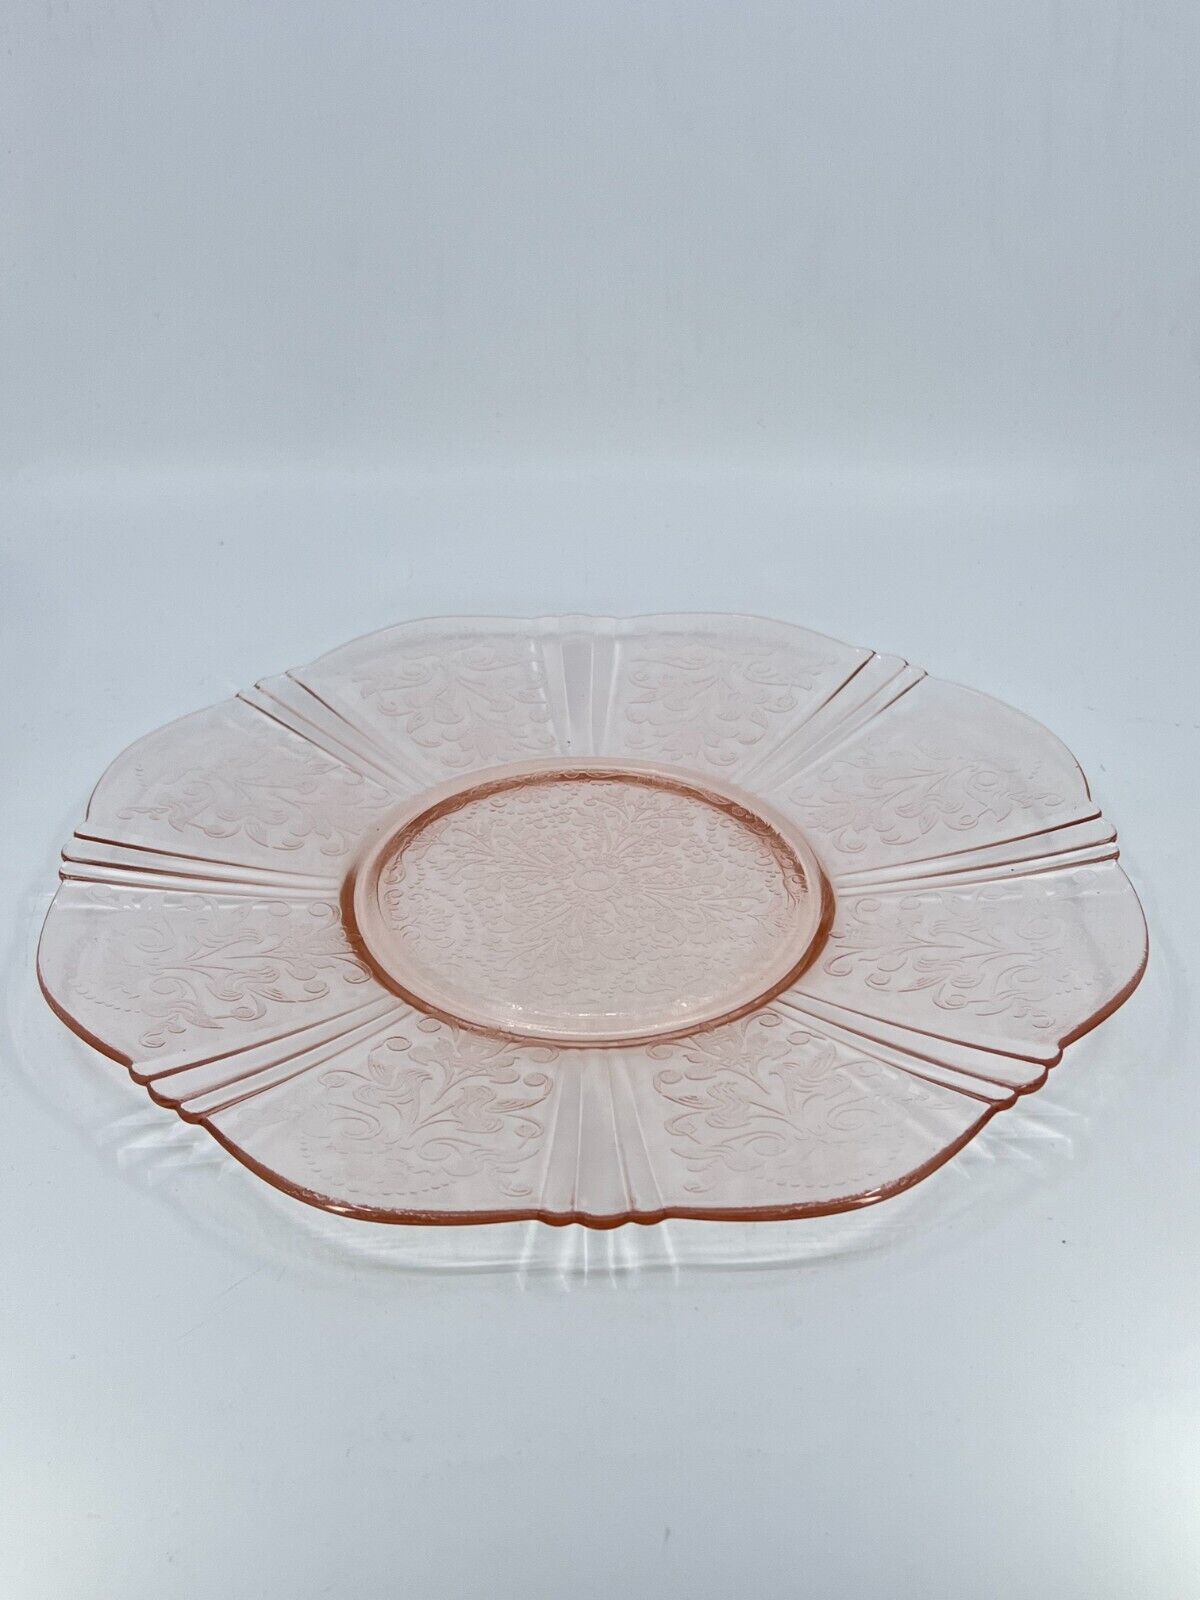 Macbeth-Evans Glass Co American Sweetheart Pink Depression Glass Salver Plate